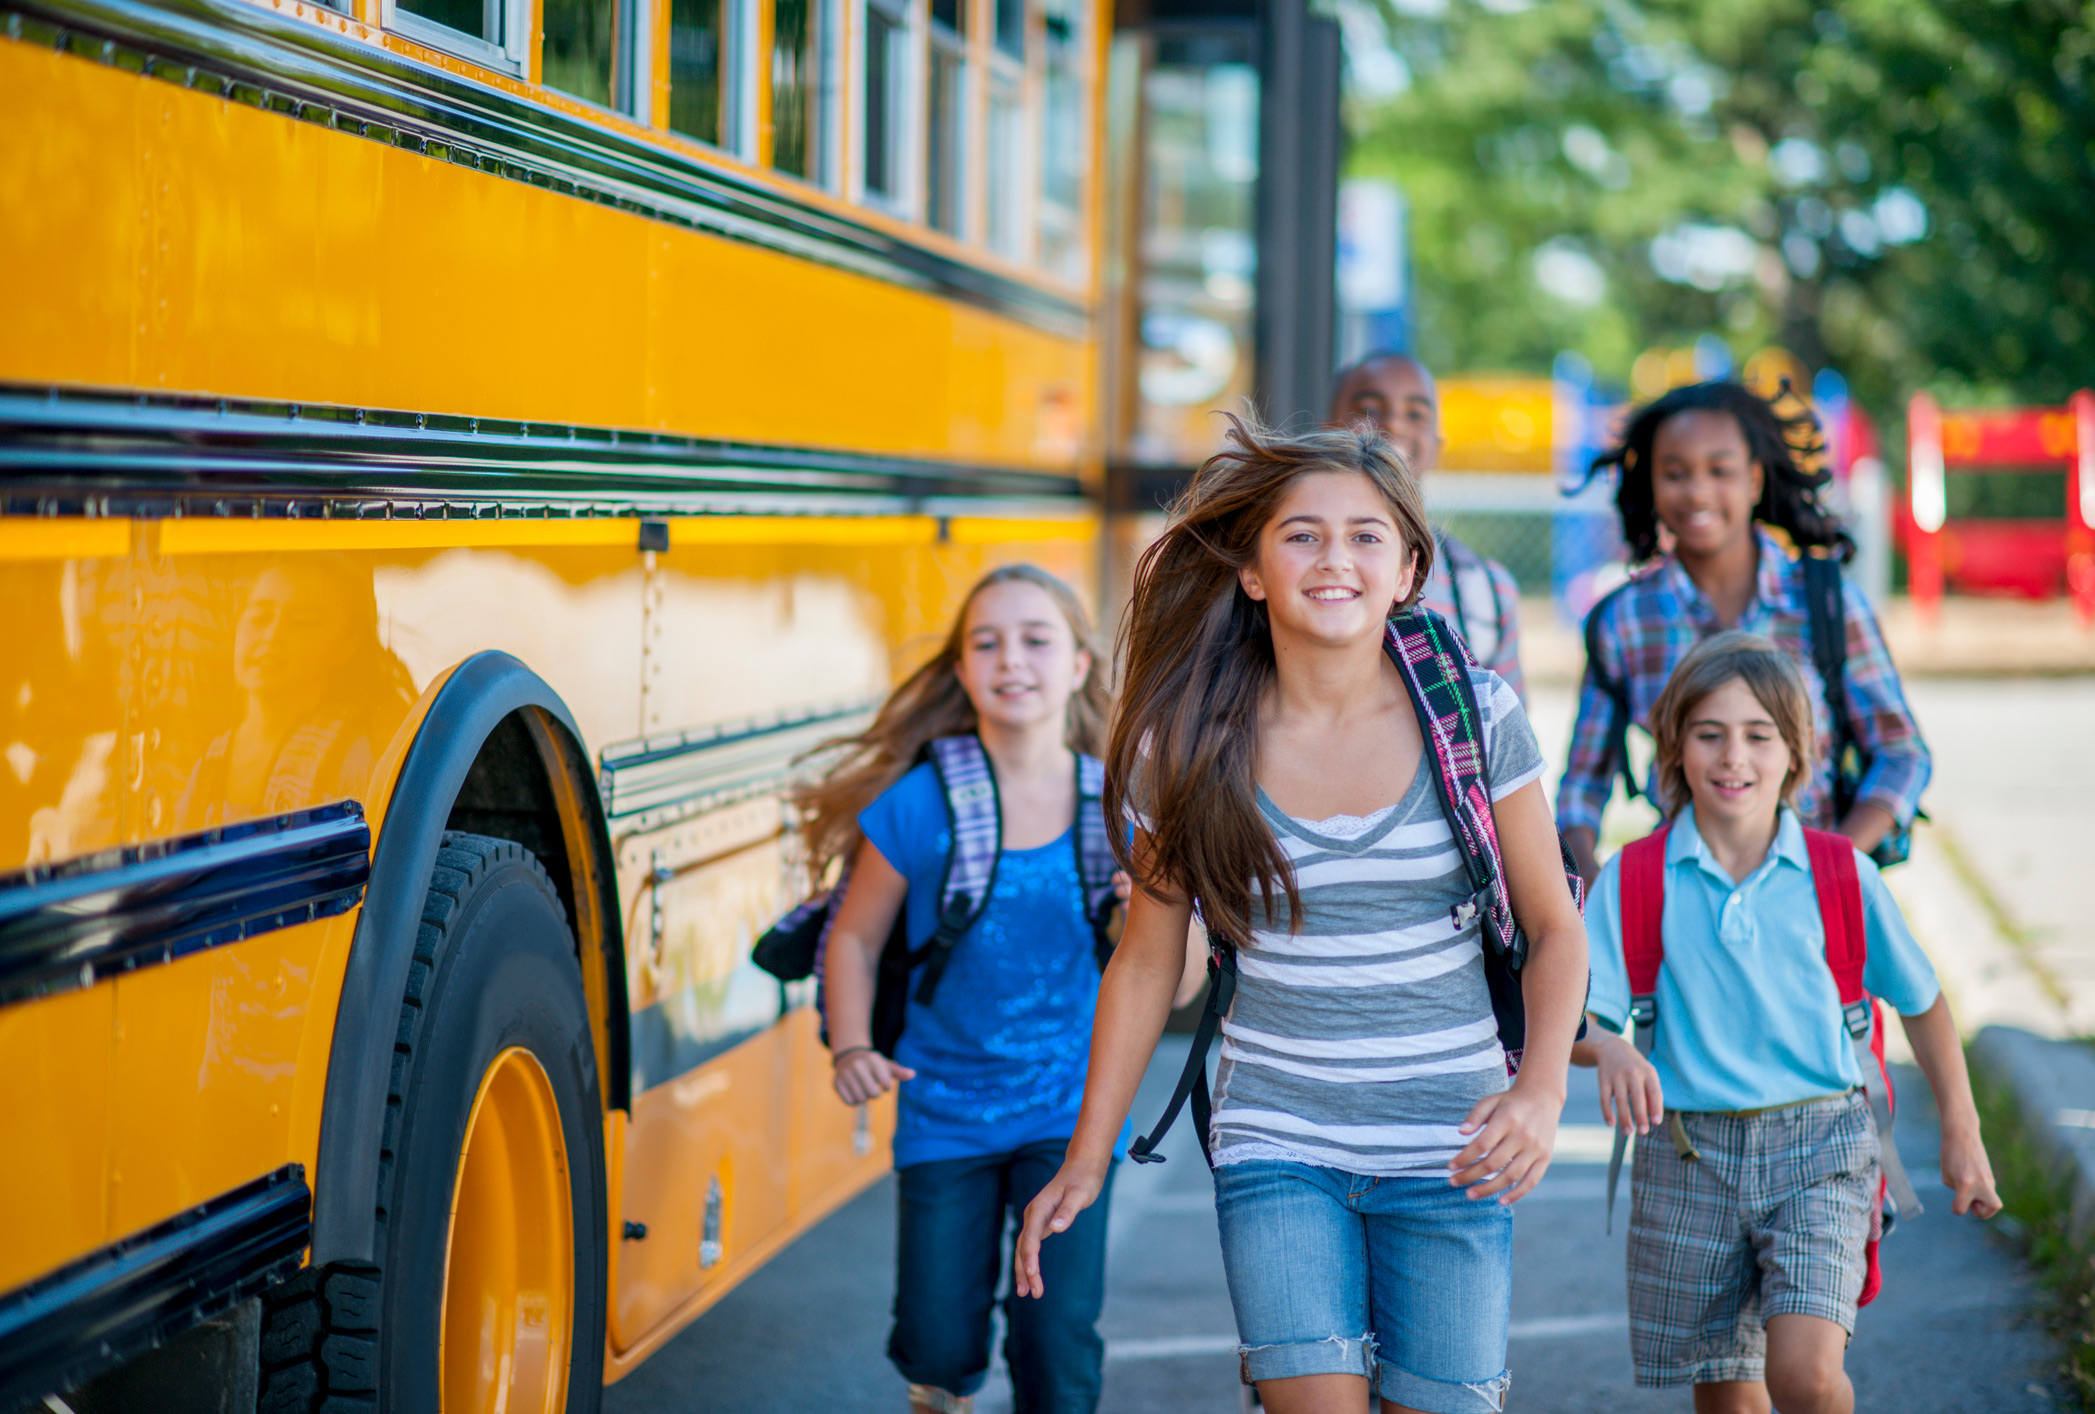 How to make back to school a fun, safe time